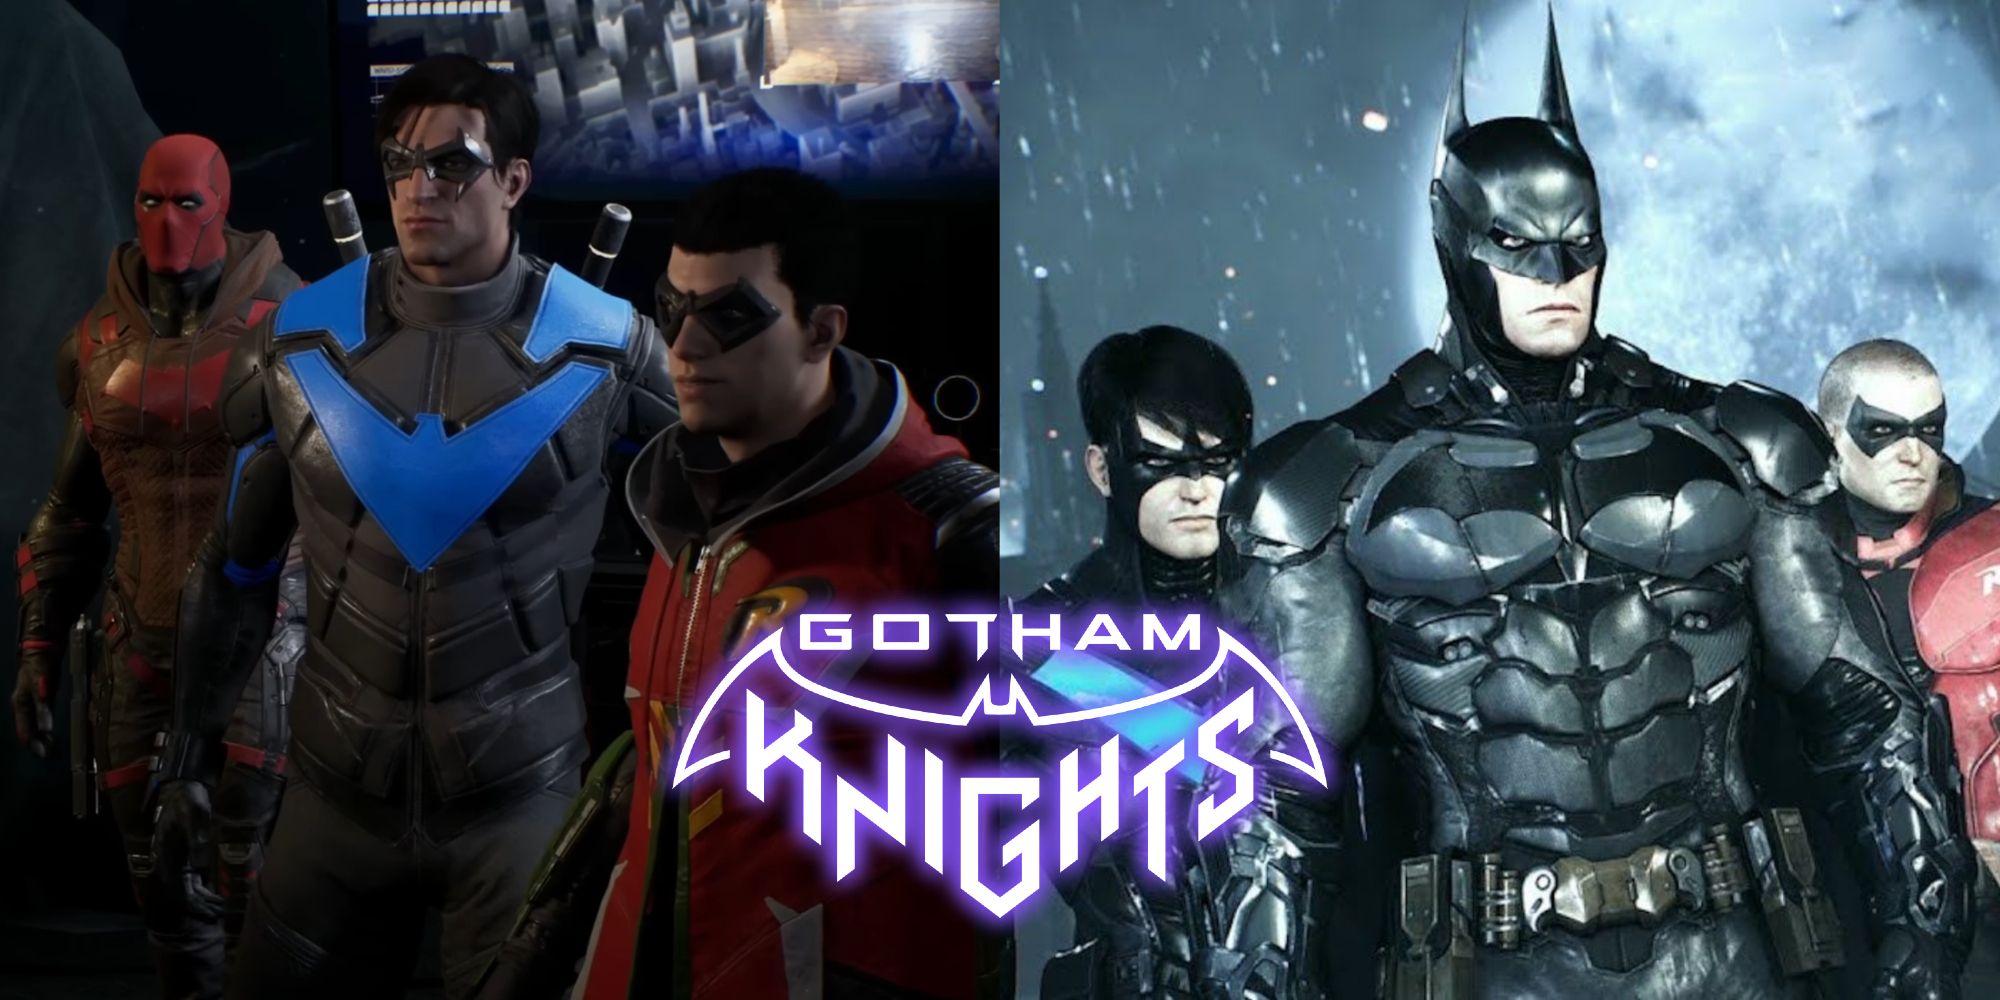 Thoughts on the reveals of GOTHAM KNIGHTS and SUICIDE SQUAD: KILL THE JUSTICE  LEAGUE